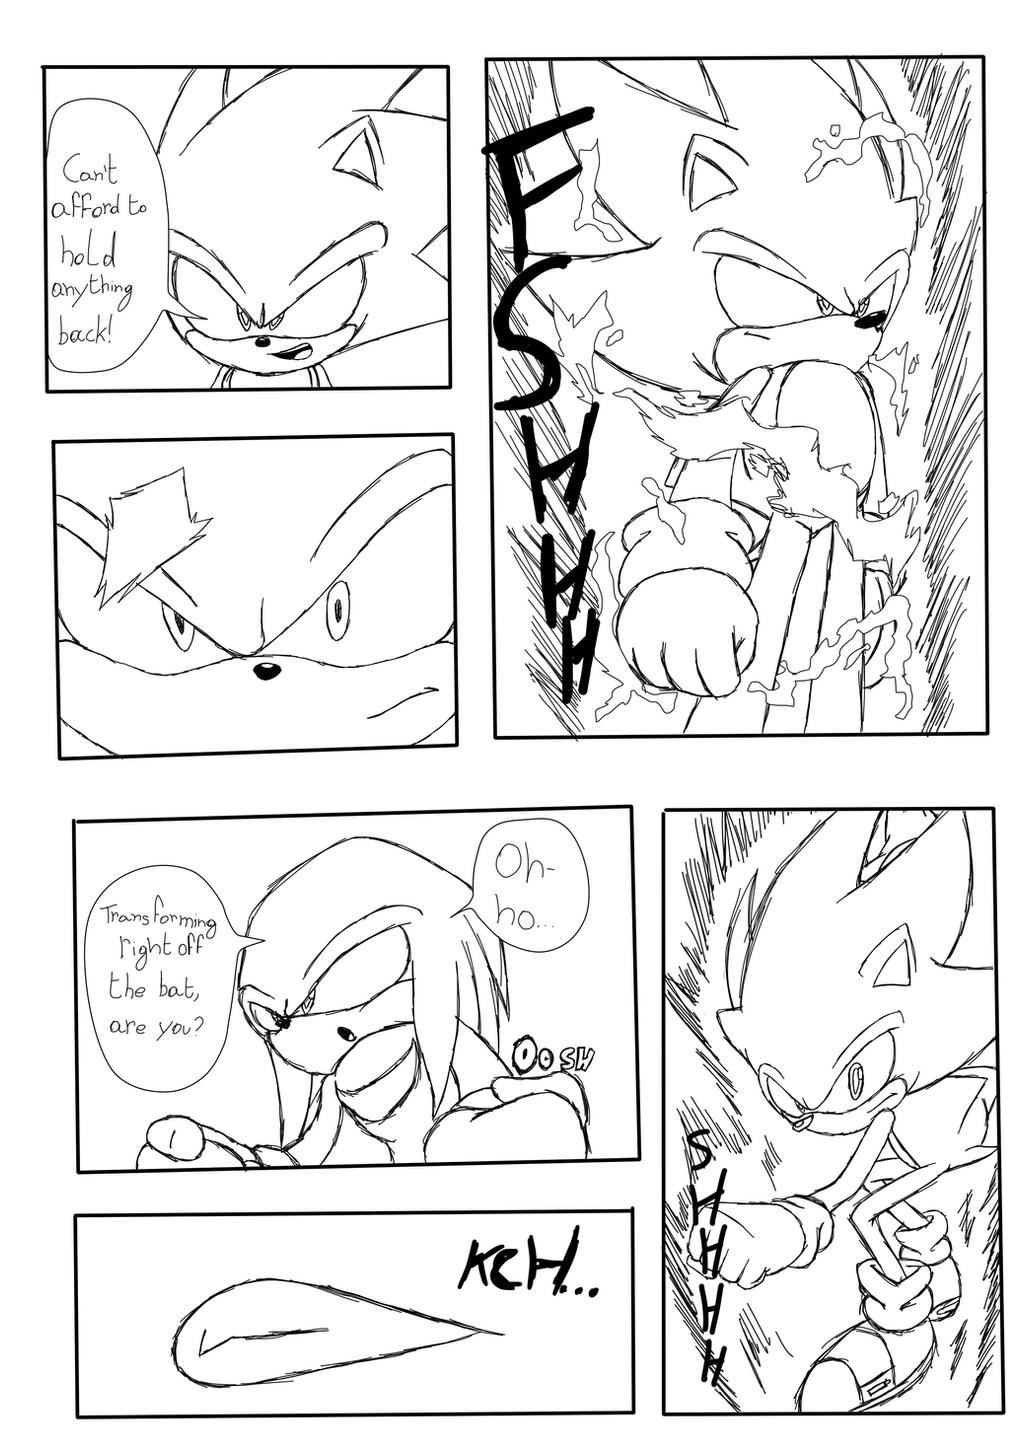 Sonic VS Knuckles Page 2